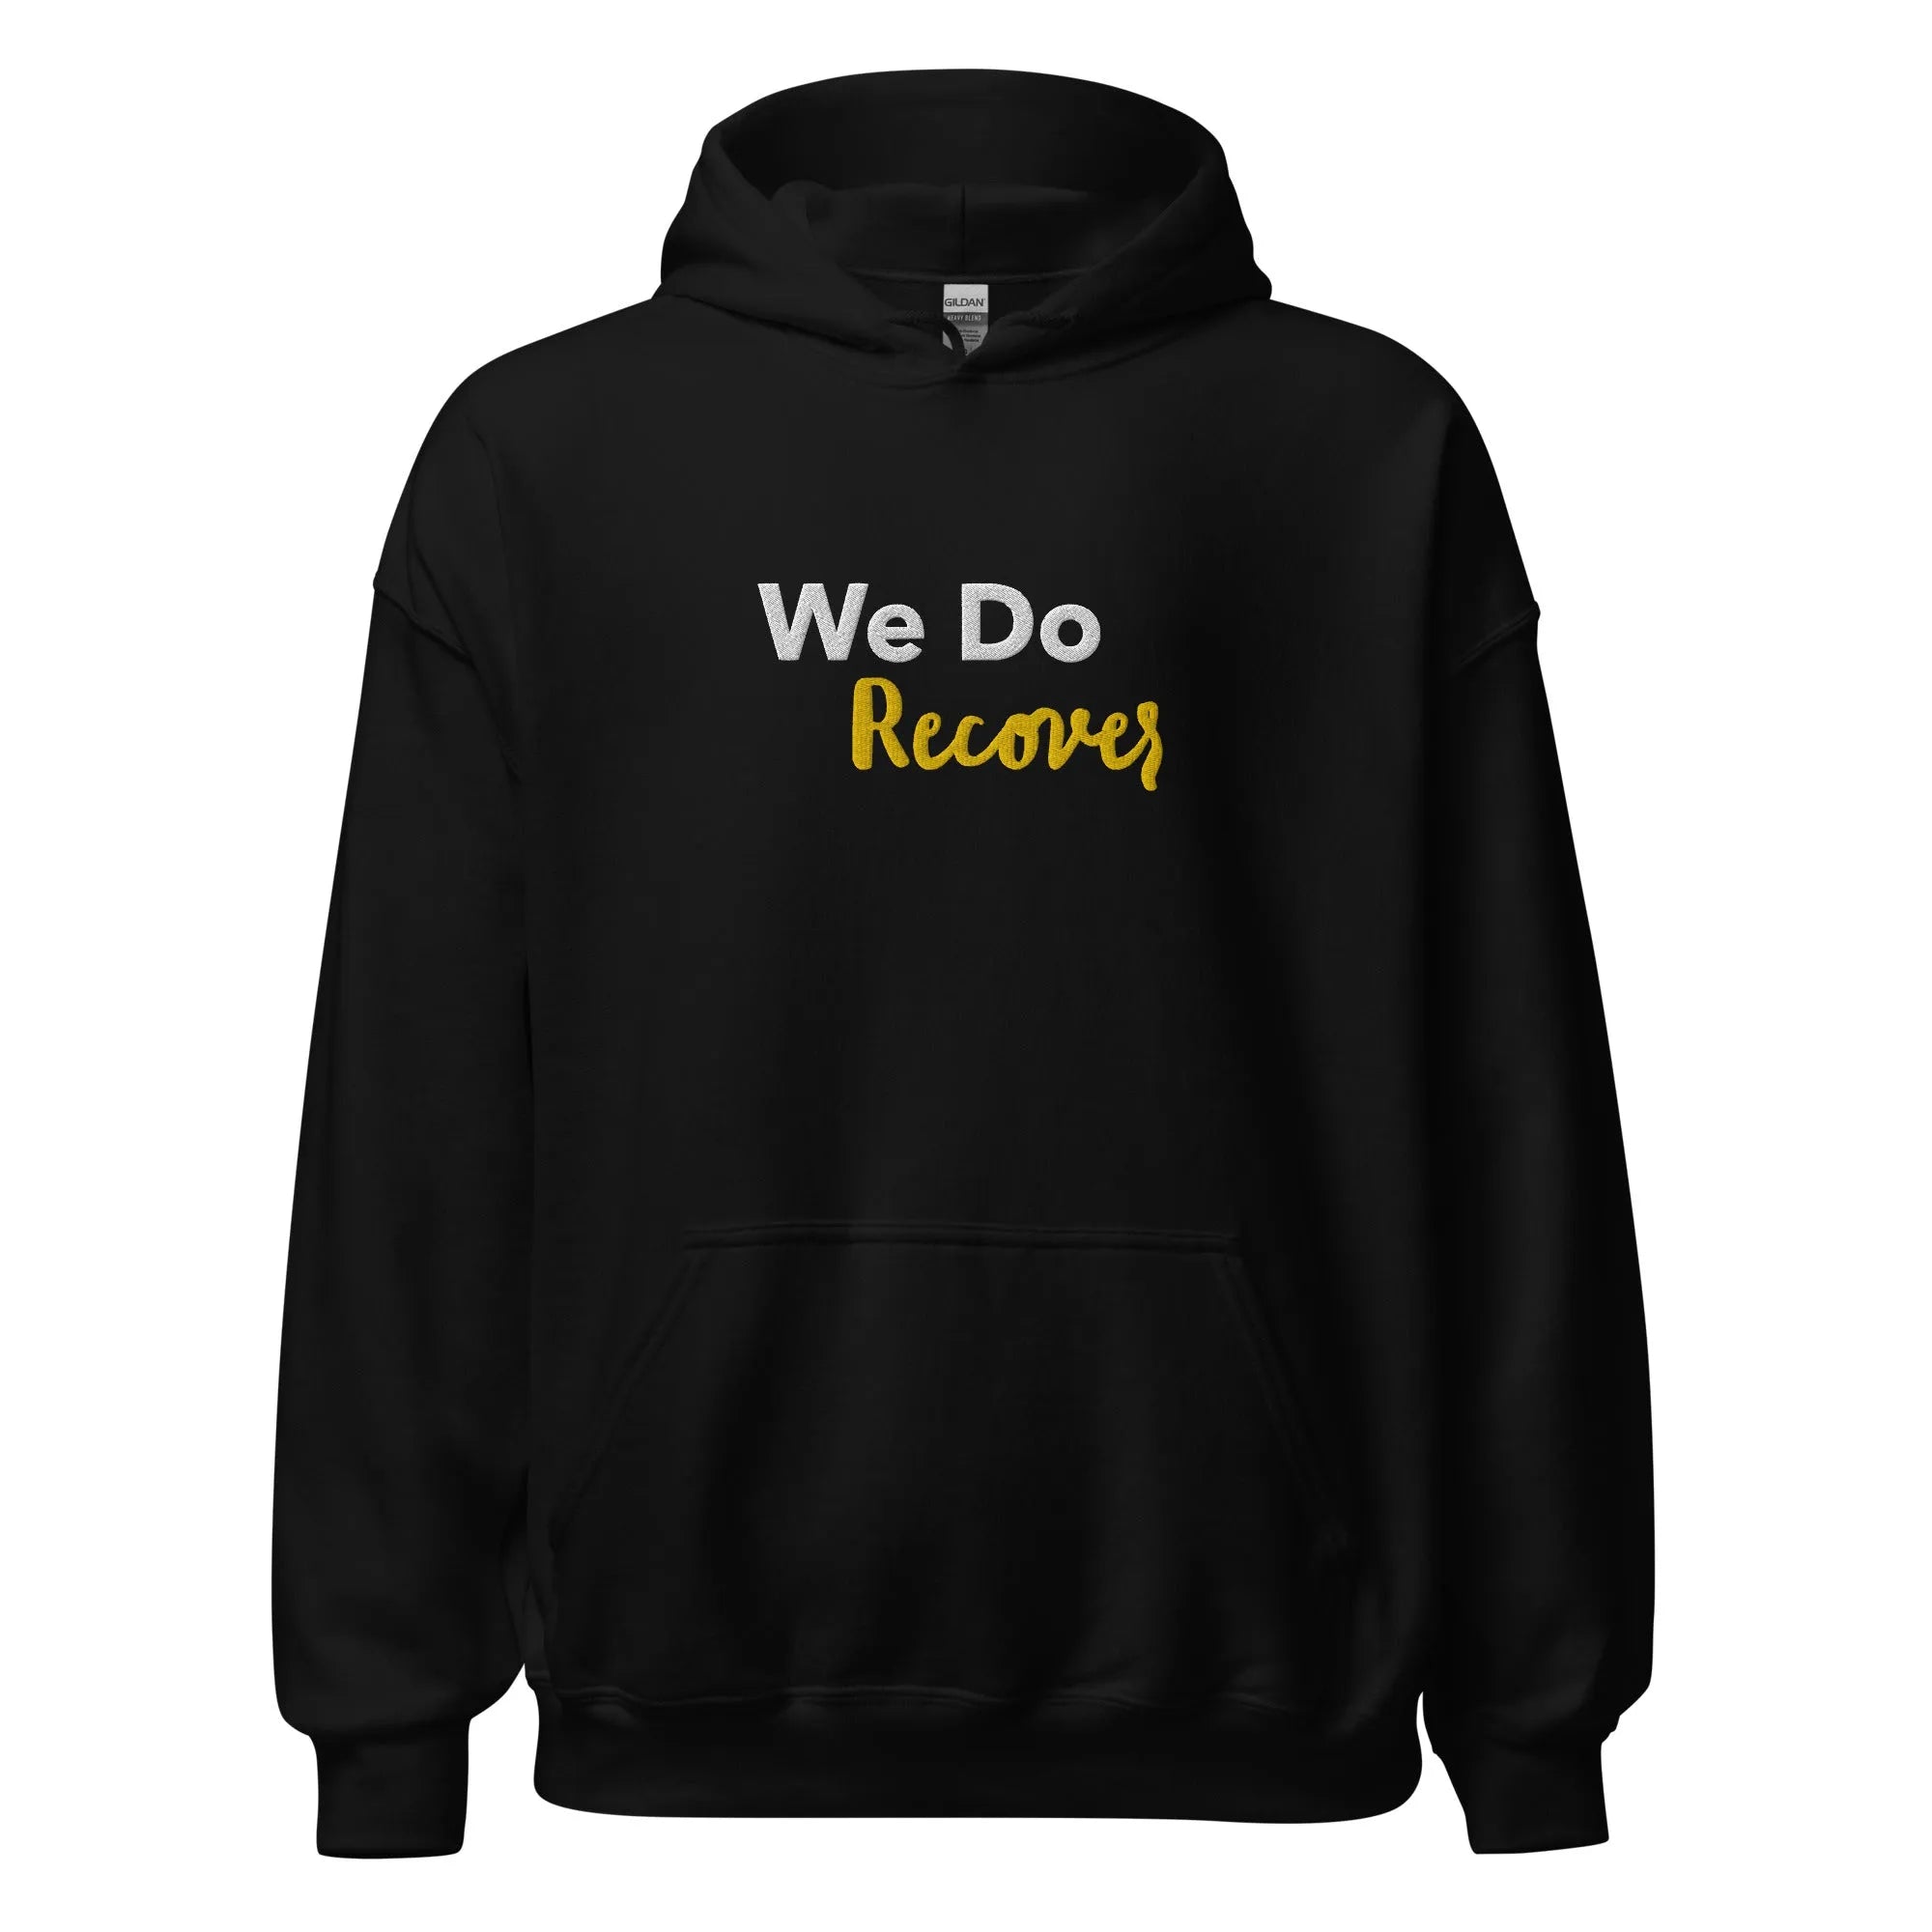 We Do Recover! Embroidered Unisex Hoodie - Sobervation